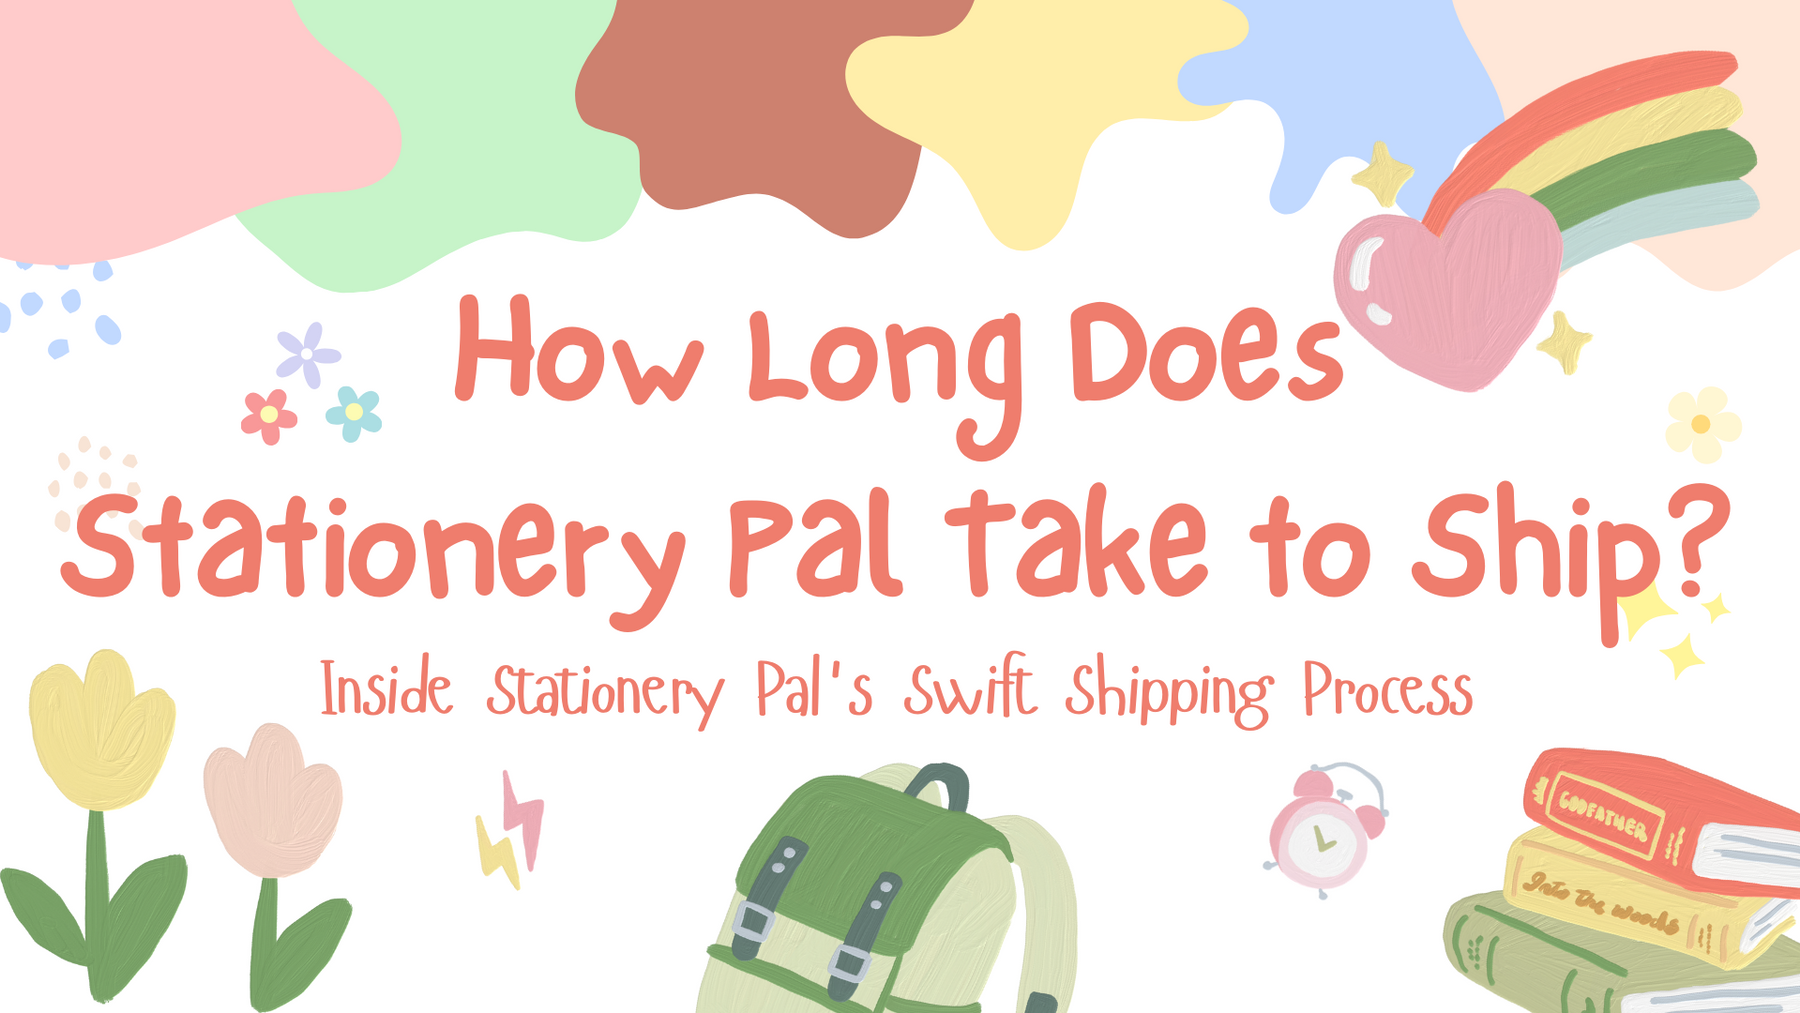 How Long Does Stationery Pal Take to Ship?